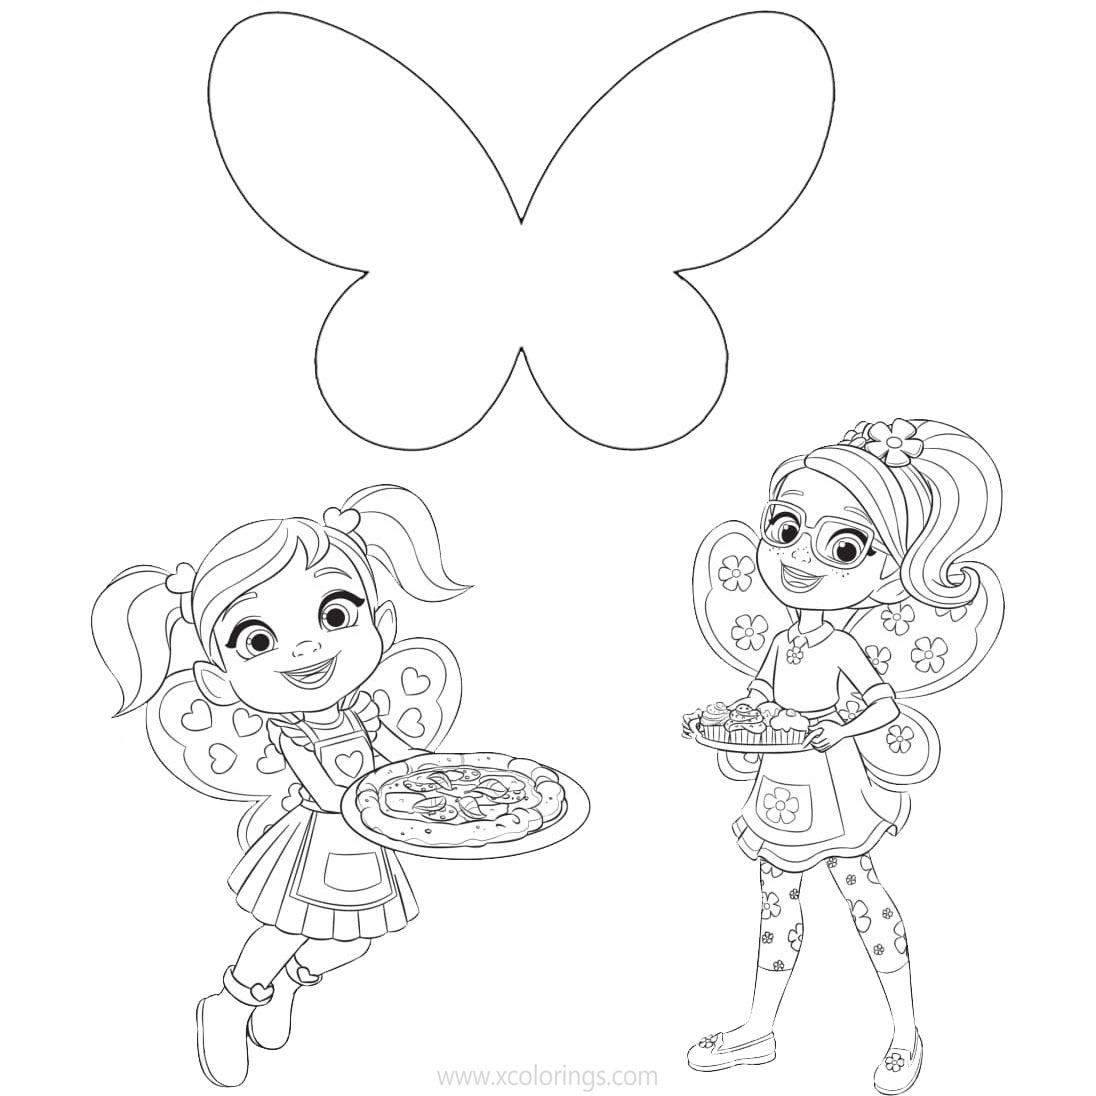 Free Butterbean's Cafe Coloring Pages Poppy and Cricket printable